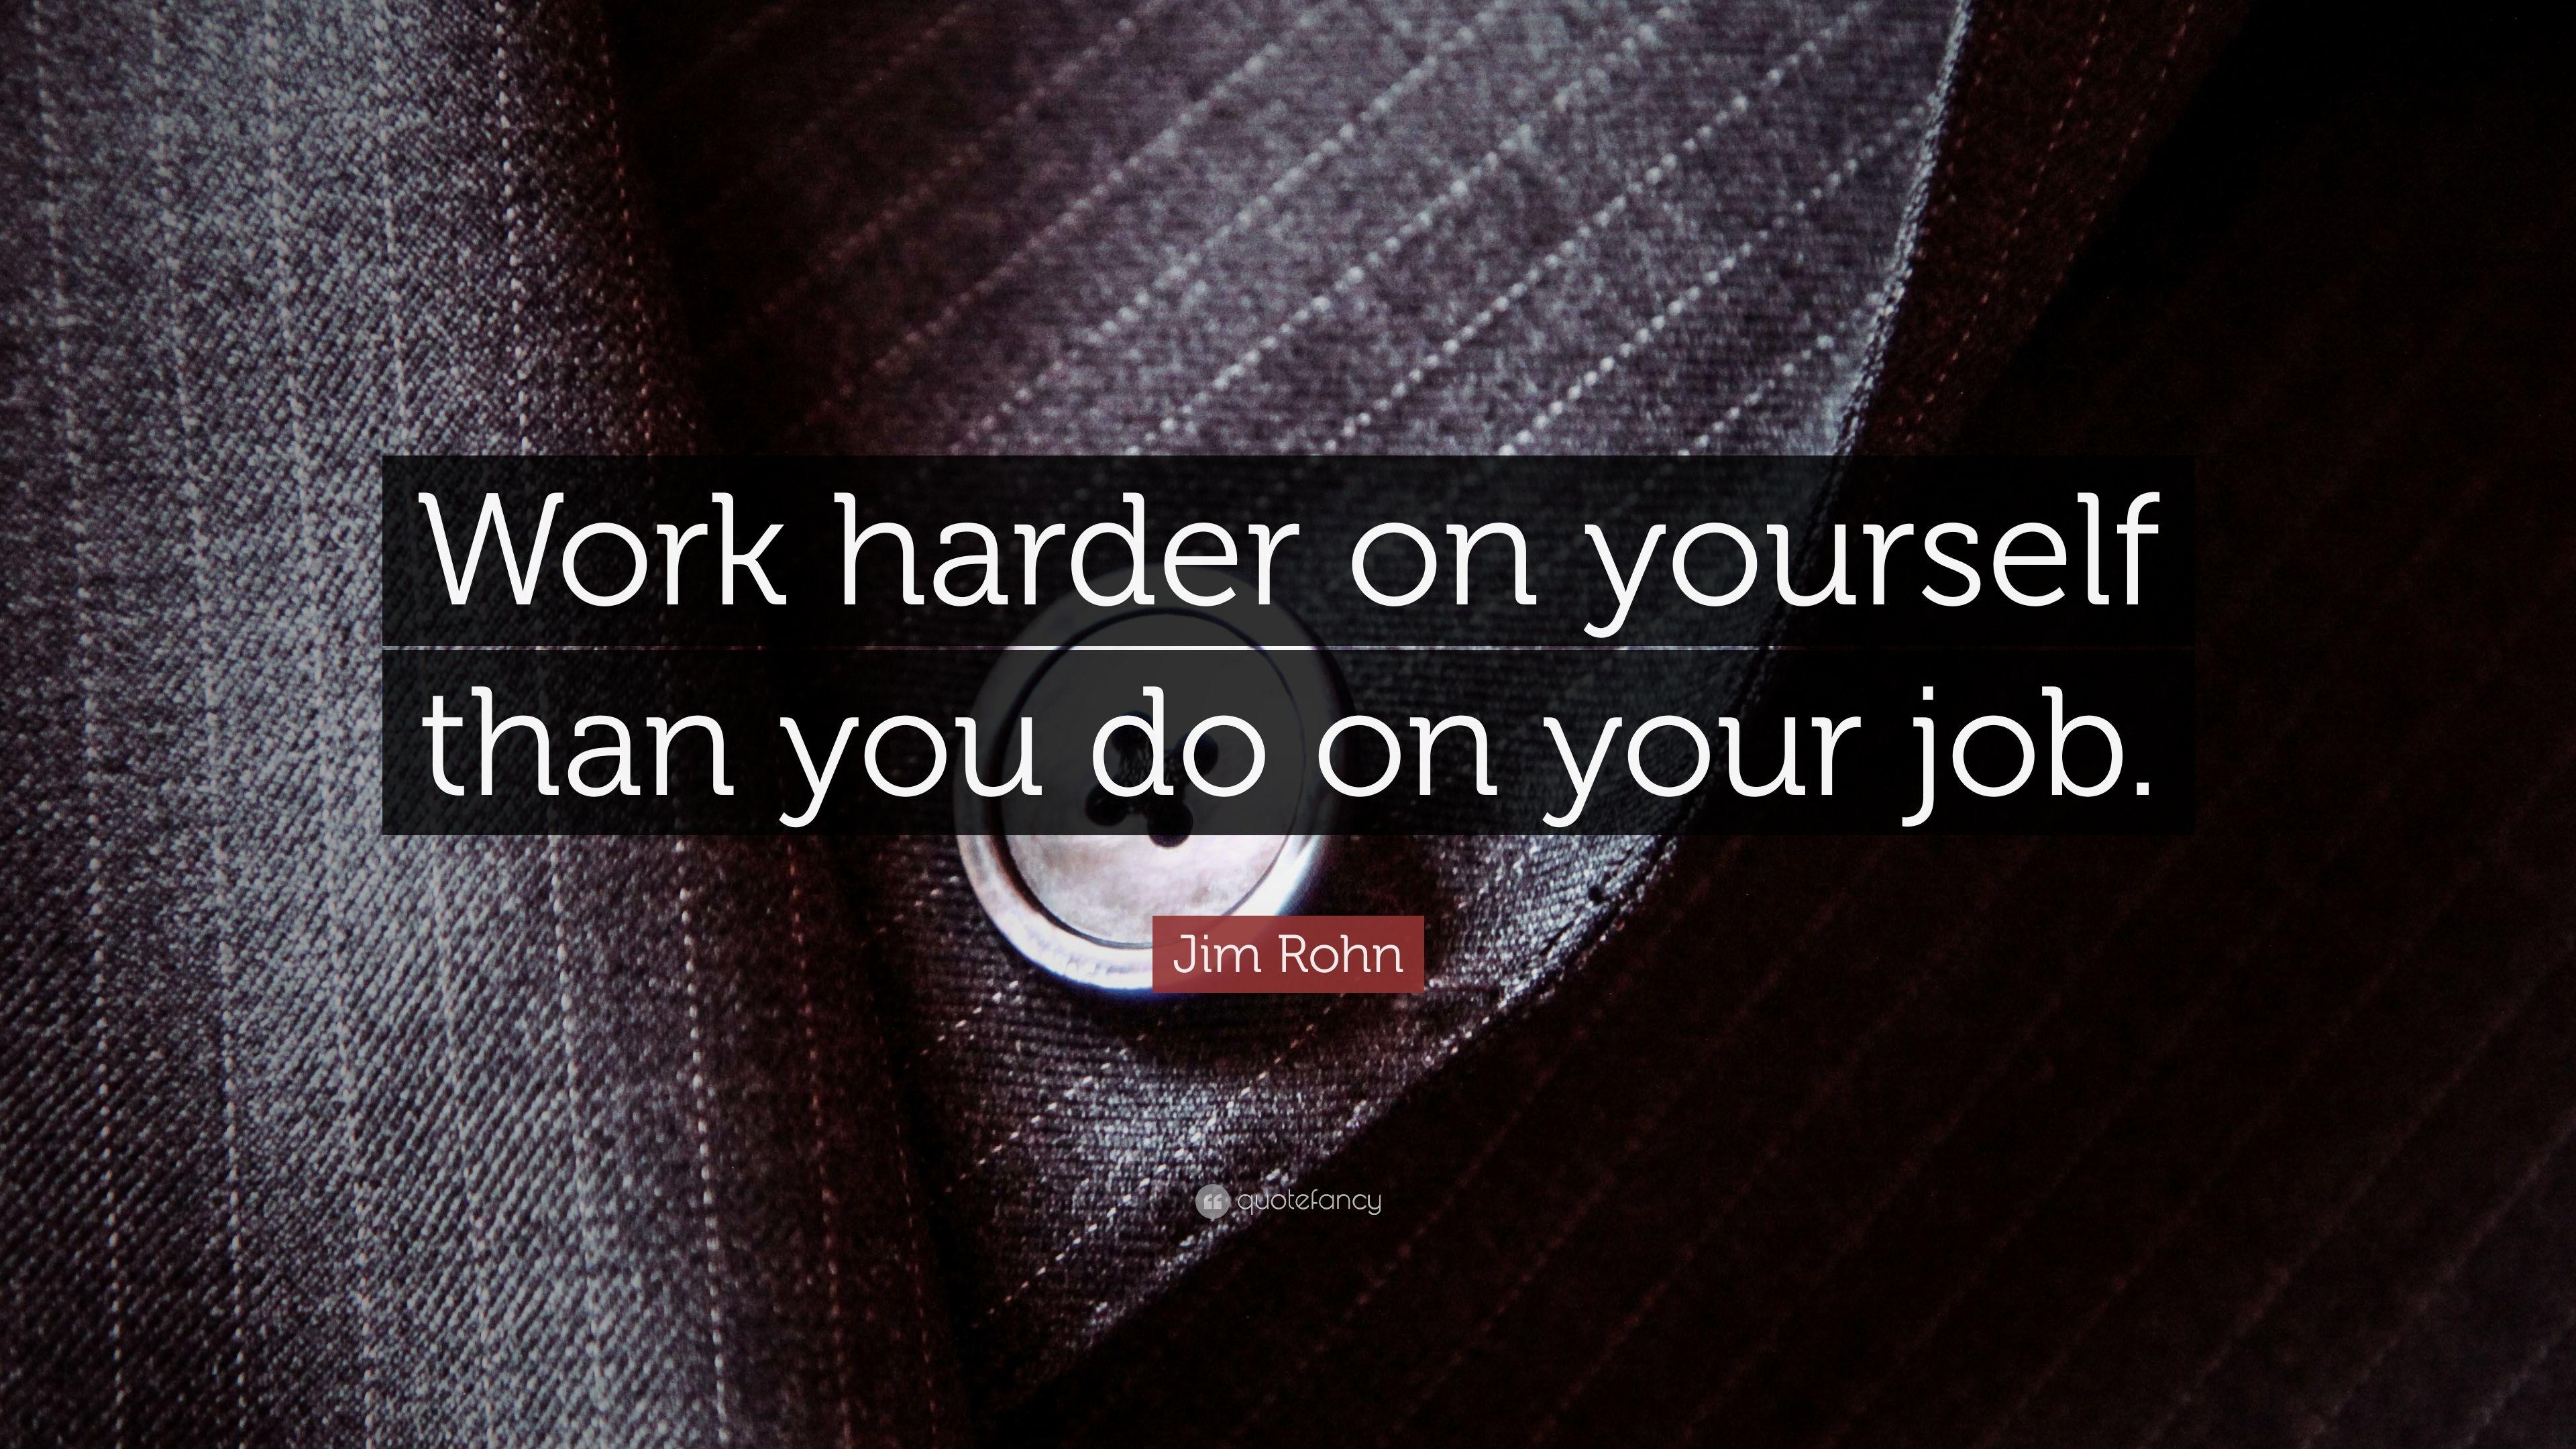 Jim Rohn Quote: “Work harder on yourself than you do on your job